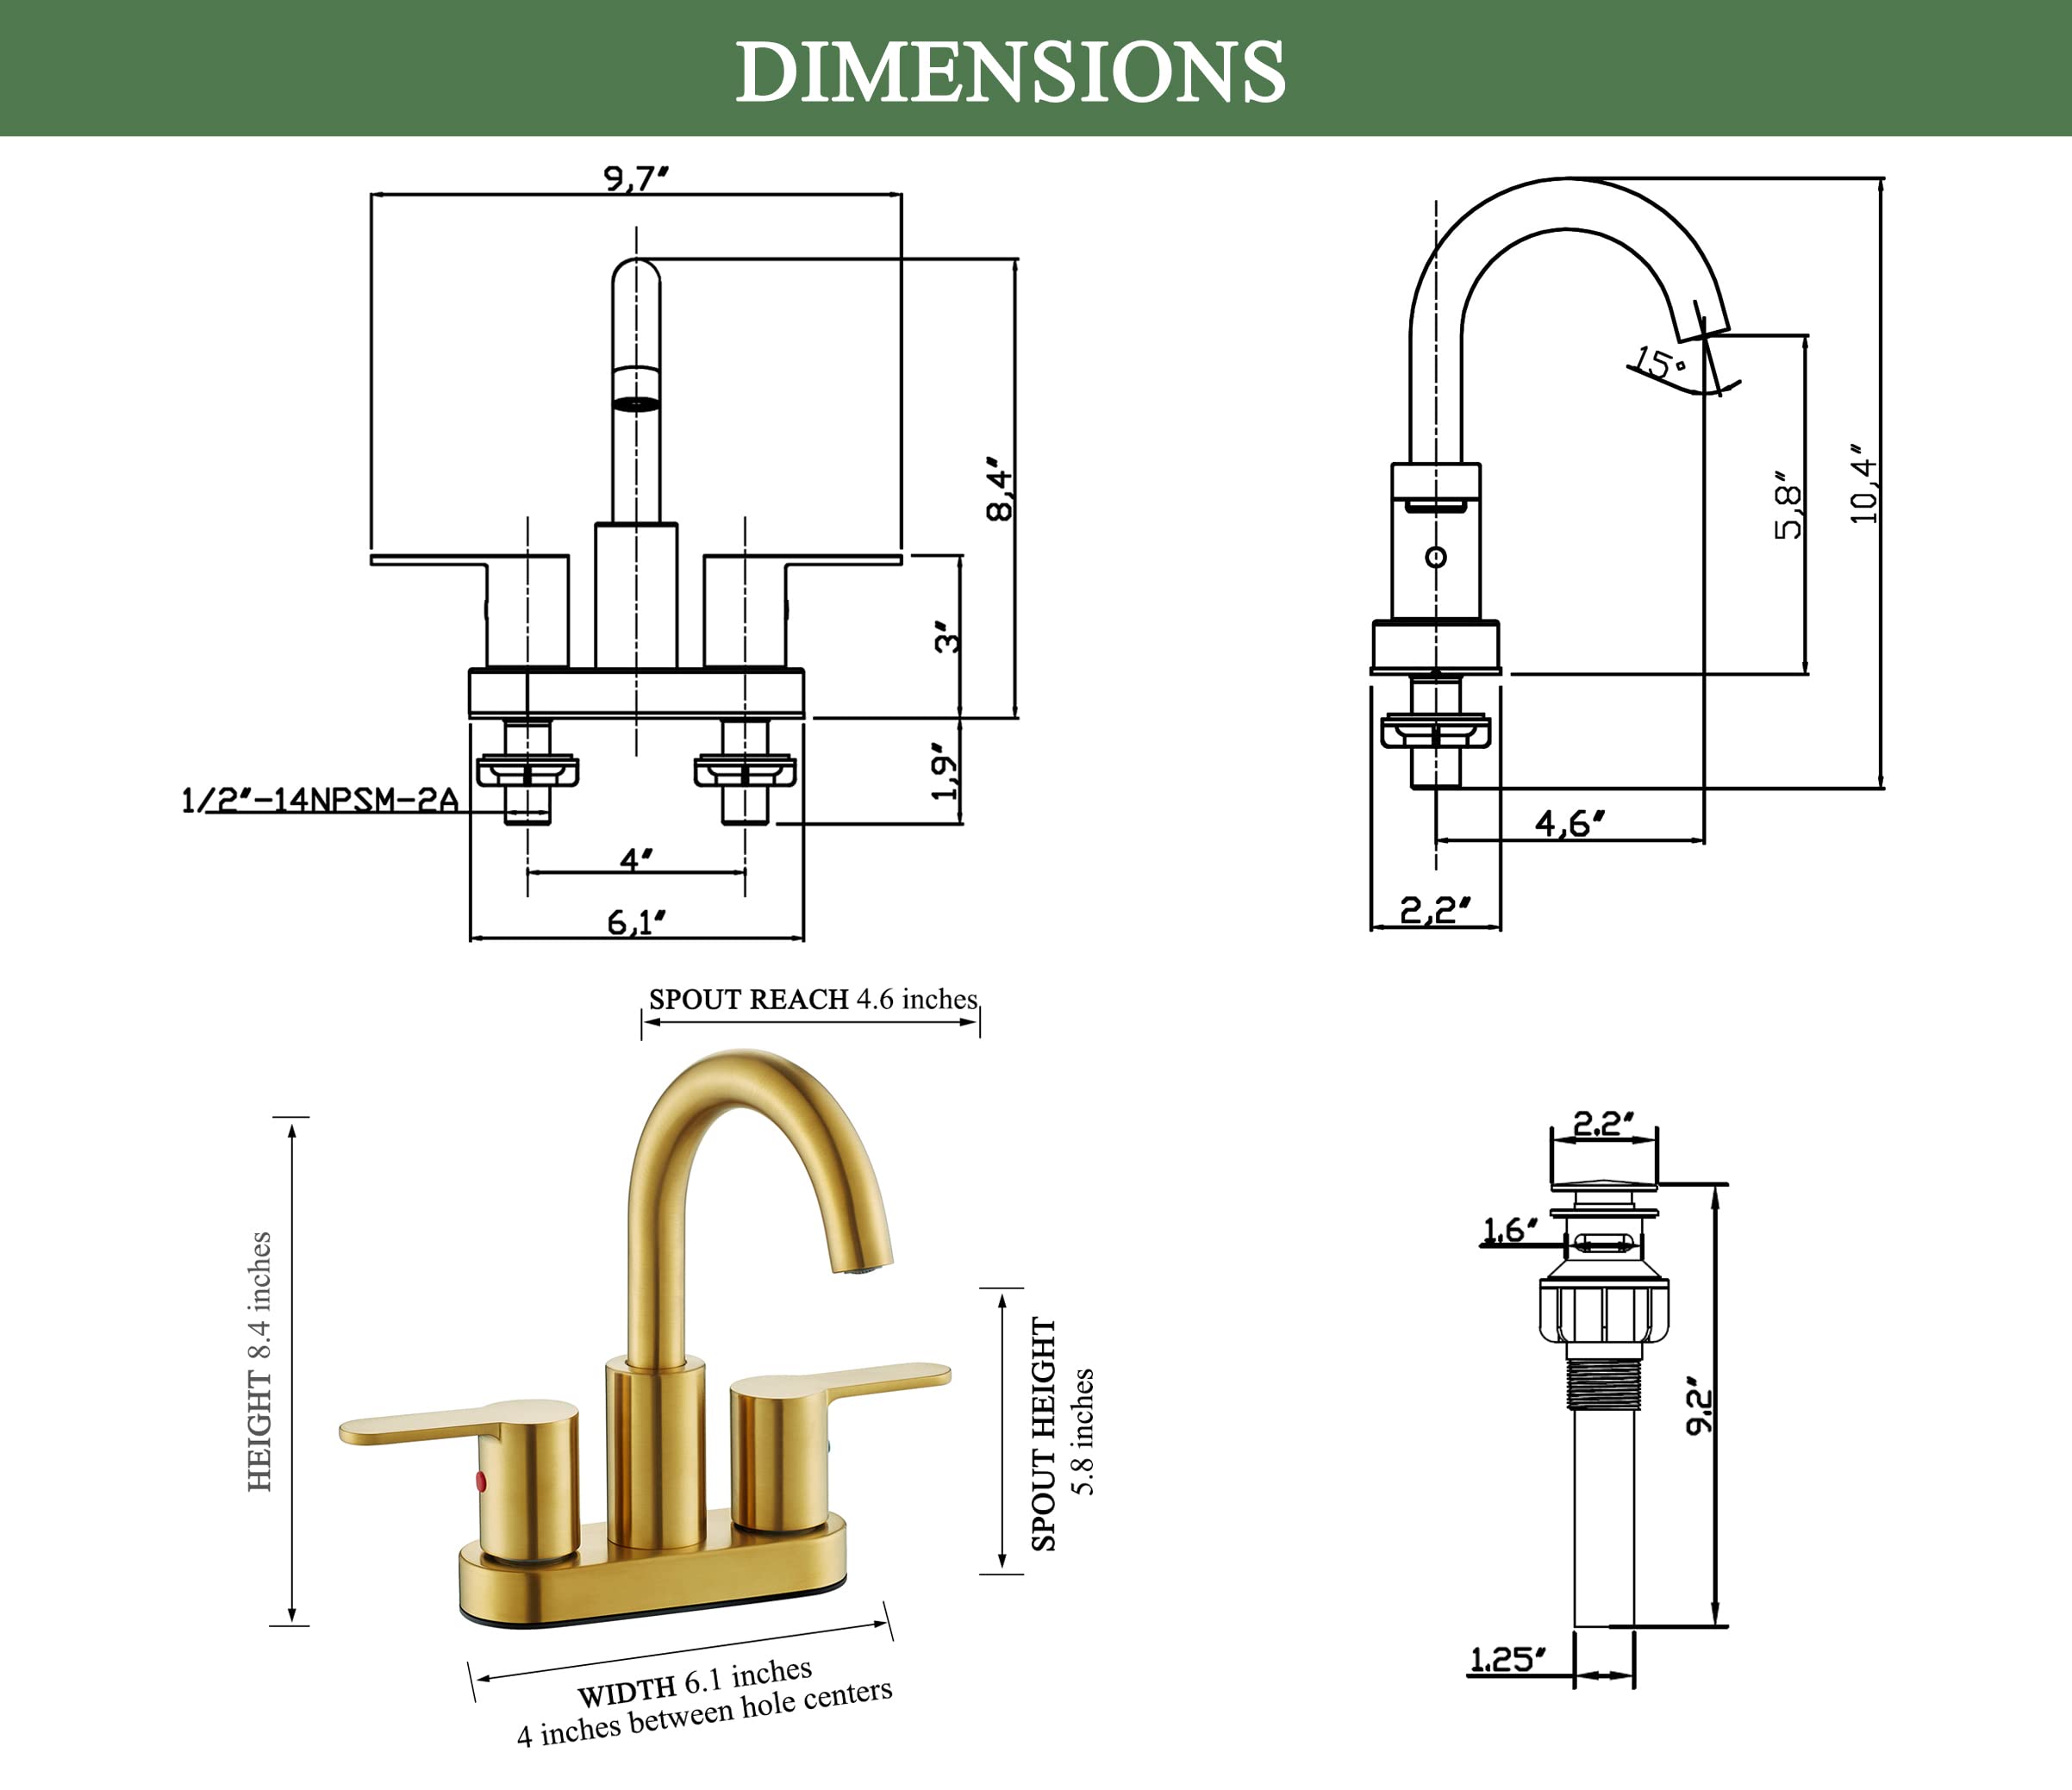 TimeArrow Brushed Gold 2 Handle Centerset Bathroom Sink Faucet with Drain Assembly, High Arc Modern 4 Inch Bathroom Vanity Lavatory Faucet 3 Holes with Brass 360° Swivel Spout, TAF067E-PB